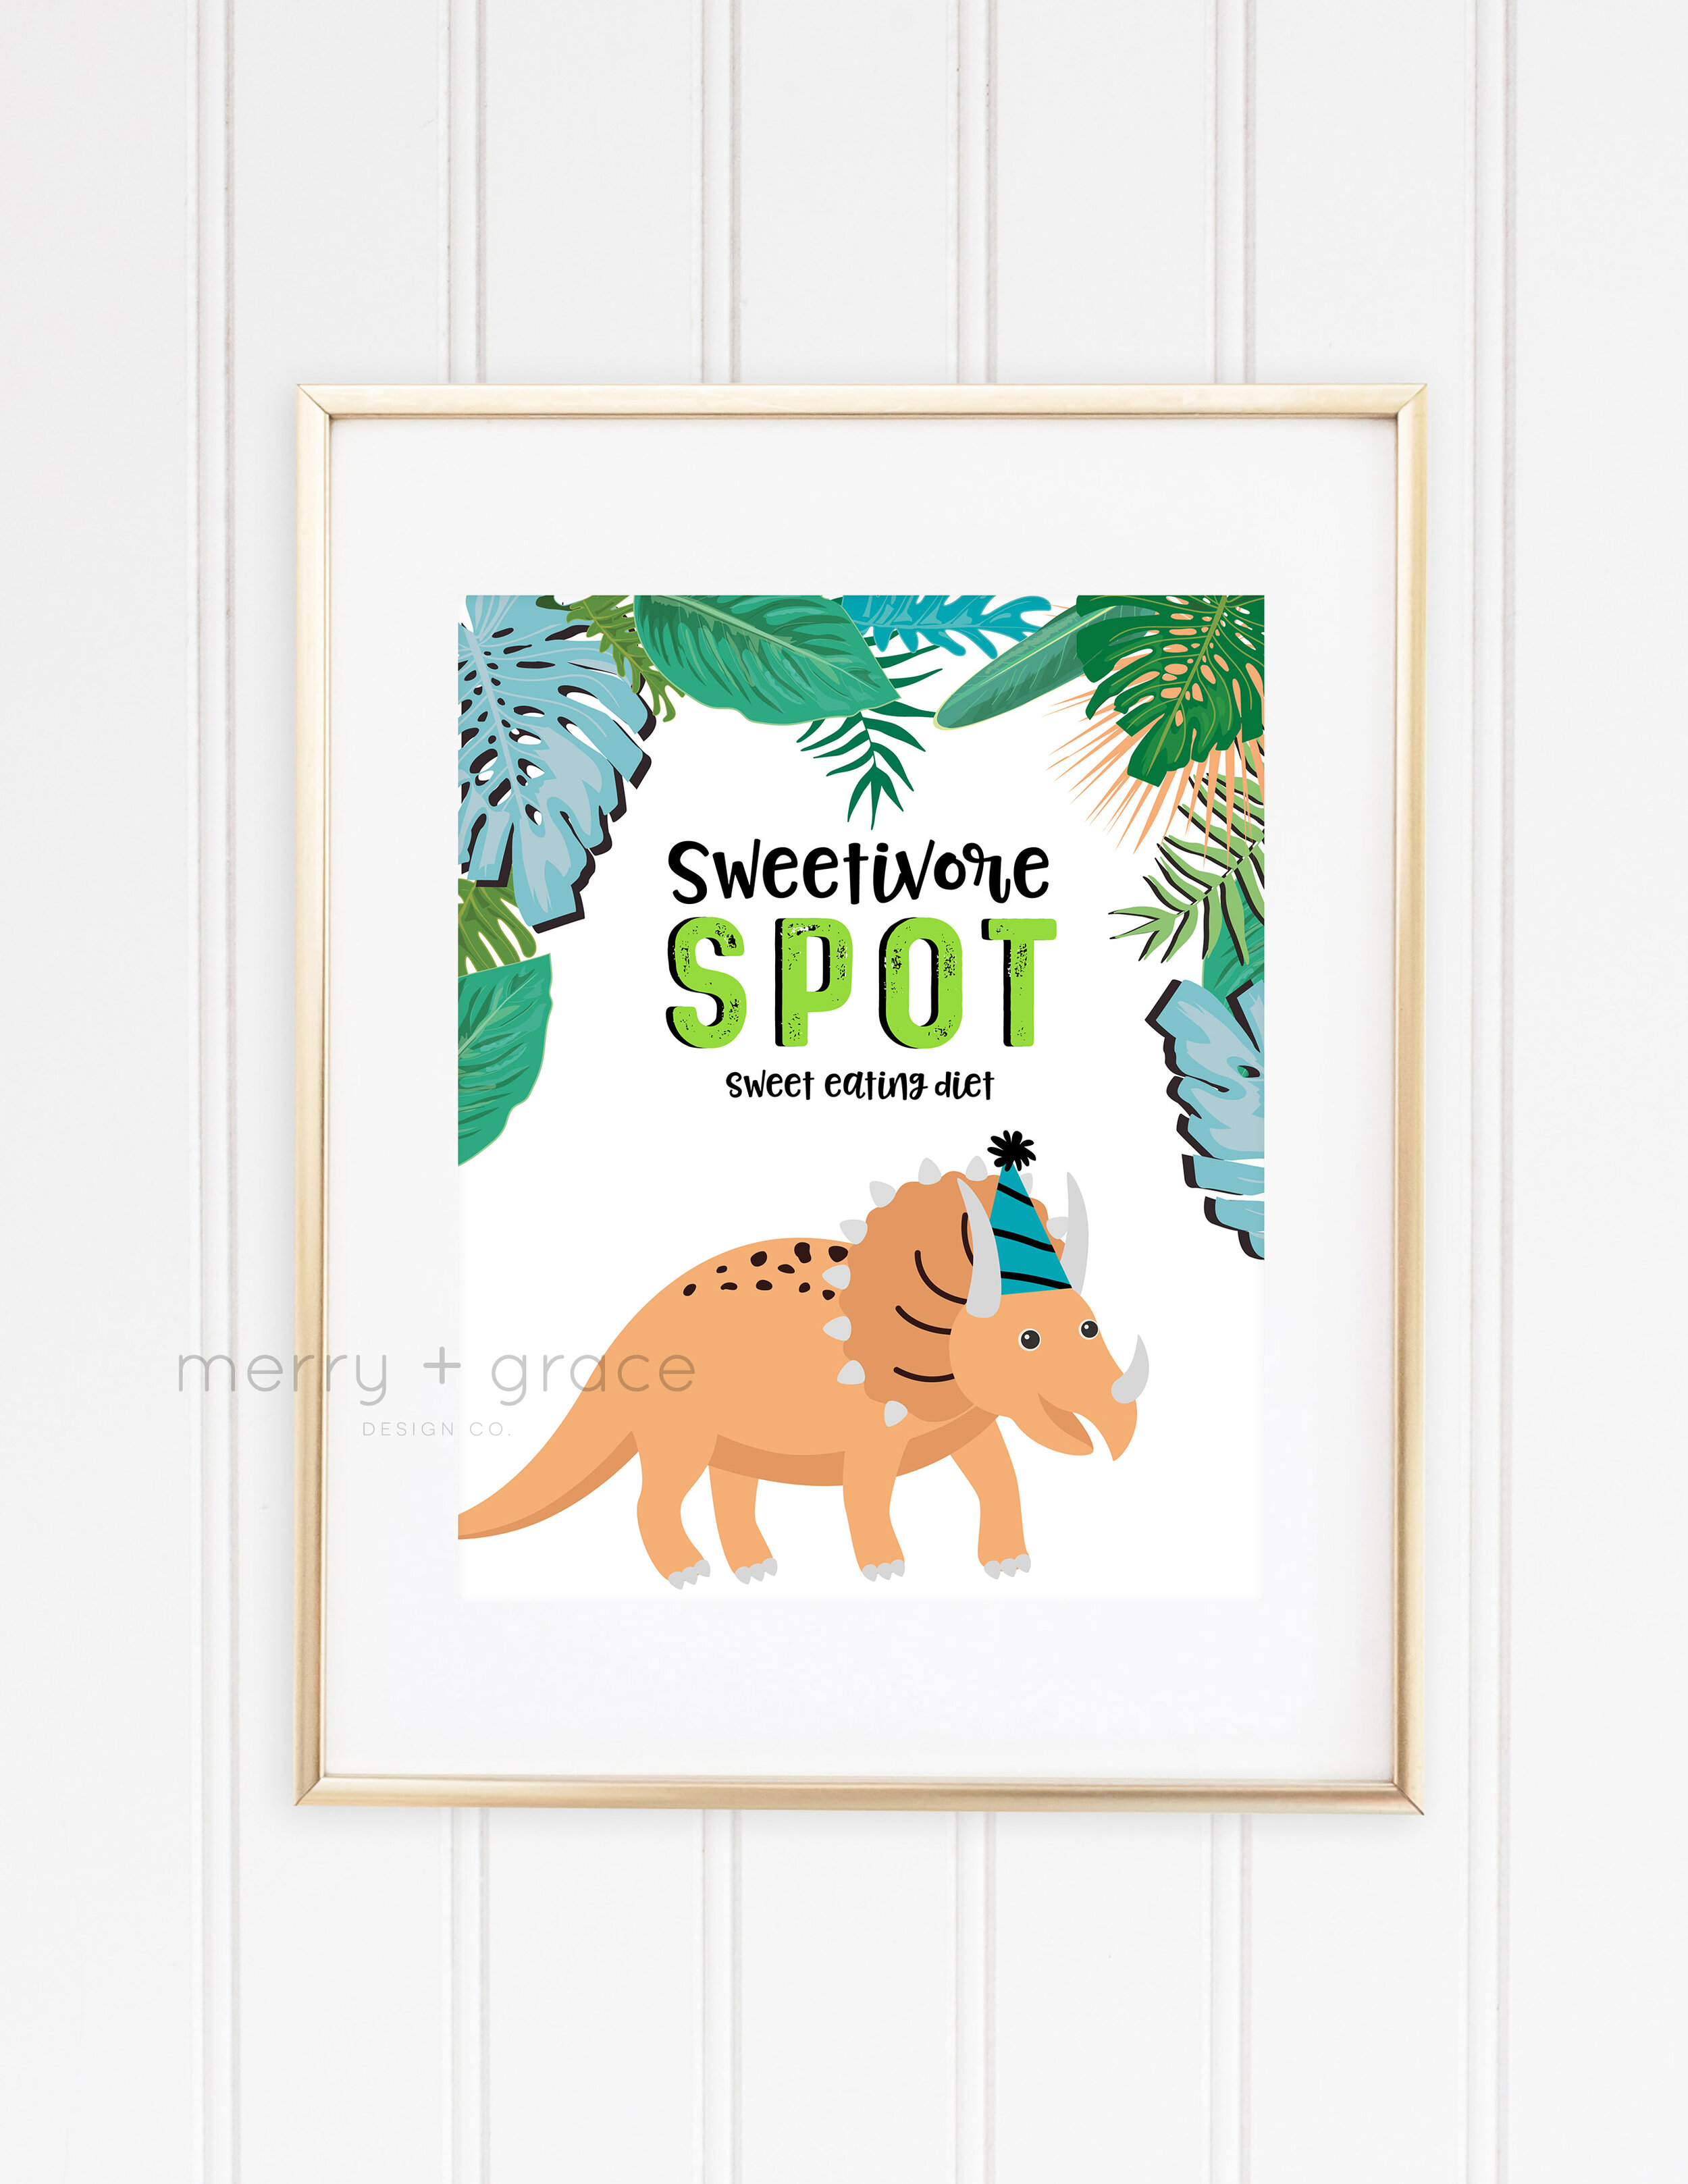 Sweetivore Spot - RAWR Dinosaur Party Signs